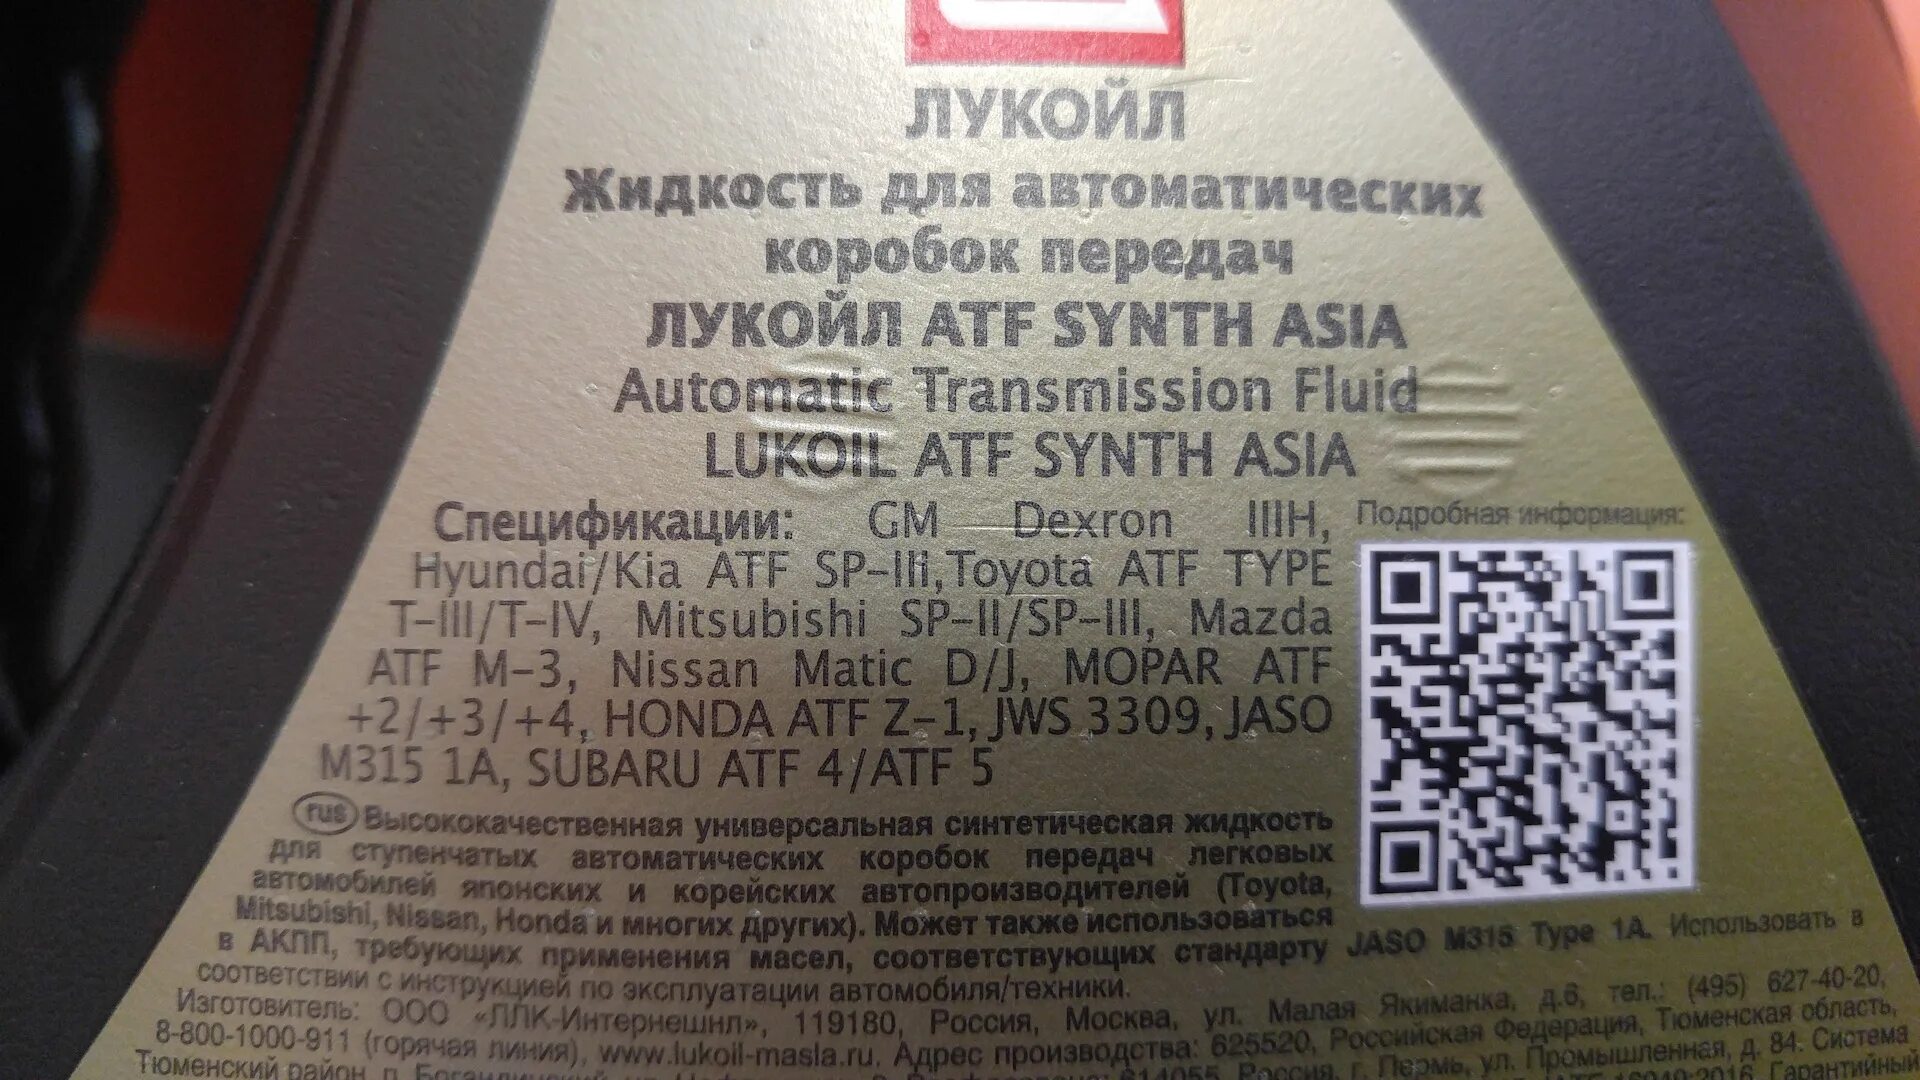 Лукойл ATF Synth Asia 4. 3132621 Лукойл ATF Synth Asia 4л. Lukoil ATF Synth Asia Mopar +4. Lukoil 191353.